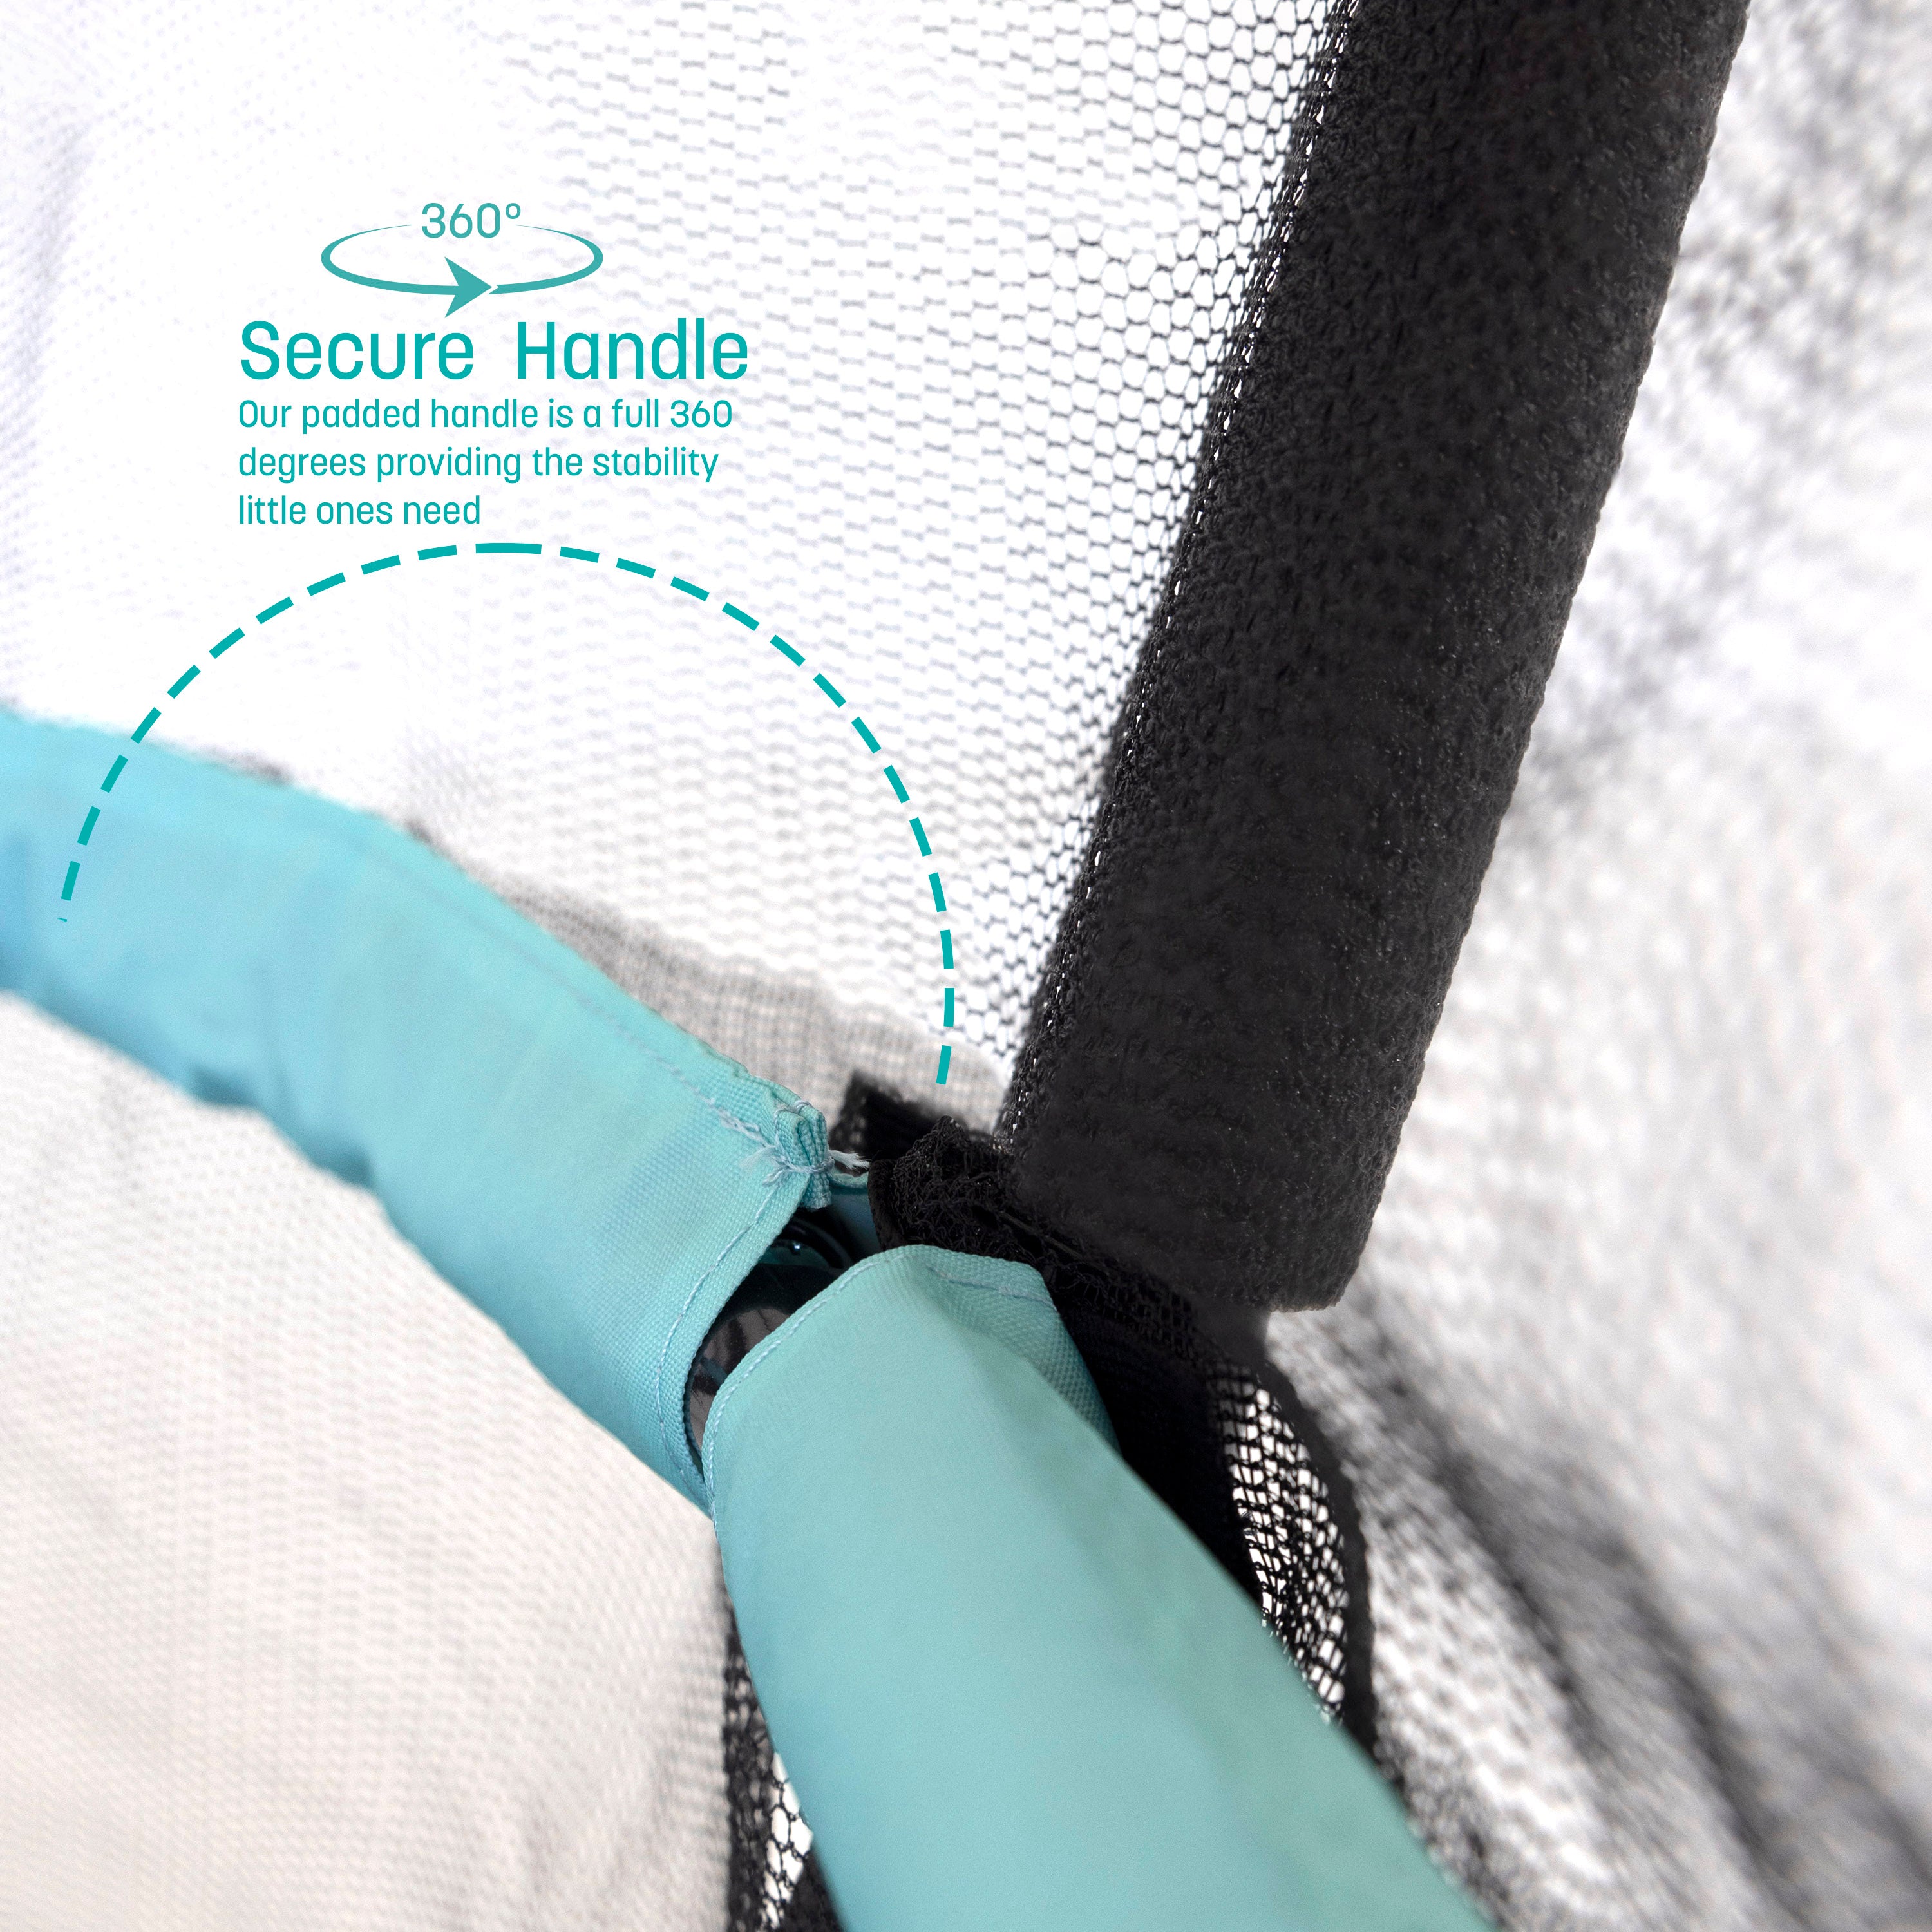 The handlebar has a light blue sleeve. A teal callout feature states, “Secure Handle: Our padded handle is a full 360 degrees providing the stability little ones need”.